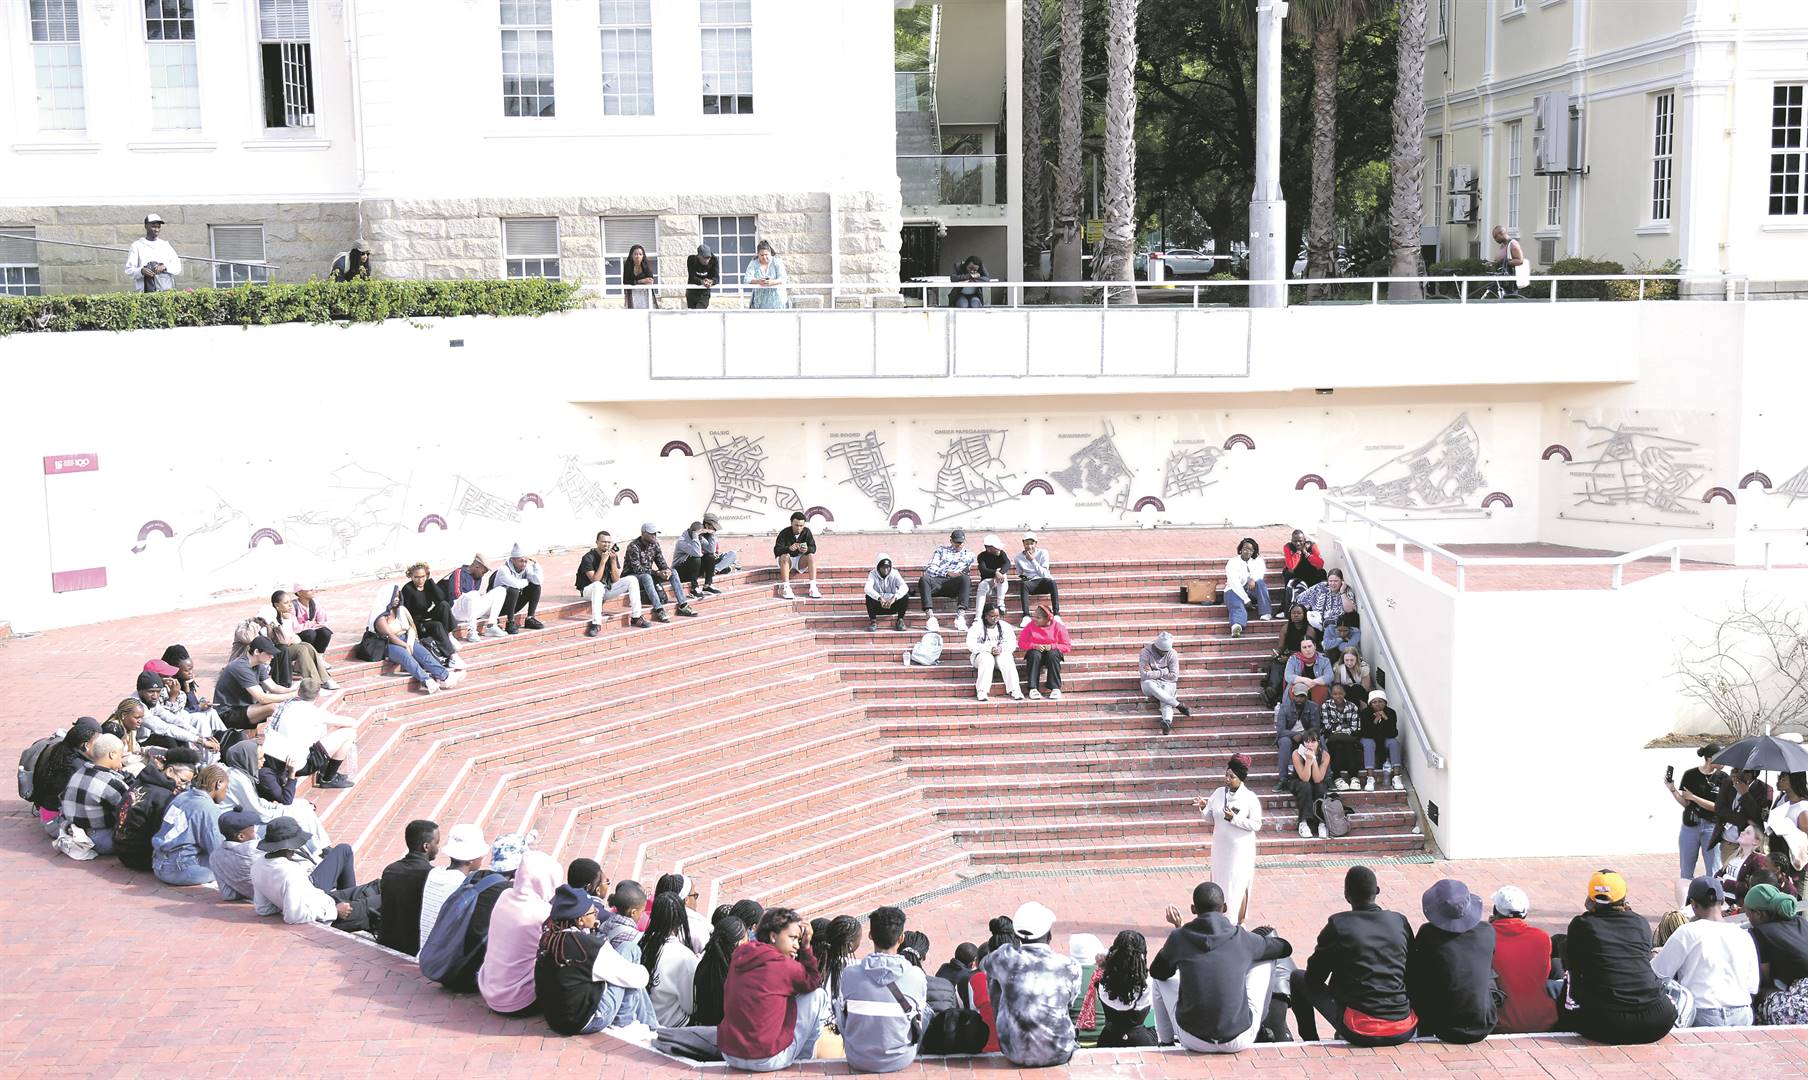 nowhere to go Concerned students gather on the rooftop of Stellenbosch University library to get feedback from the SRC about their Nsfas payments PHOTO: Edrea du Toit